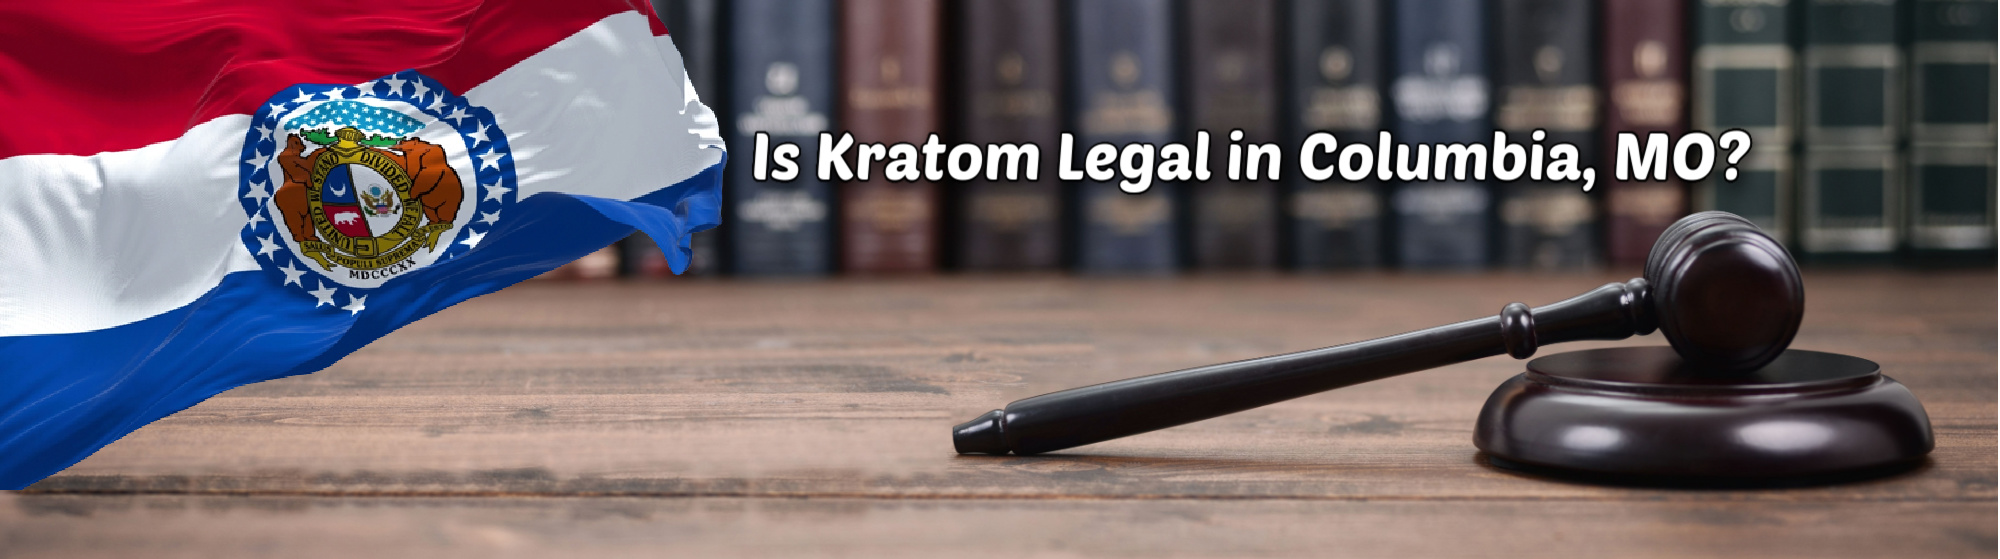 image of is kratom legal in columbia mo